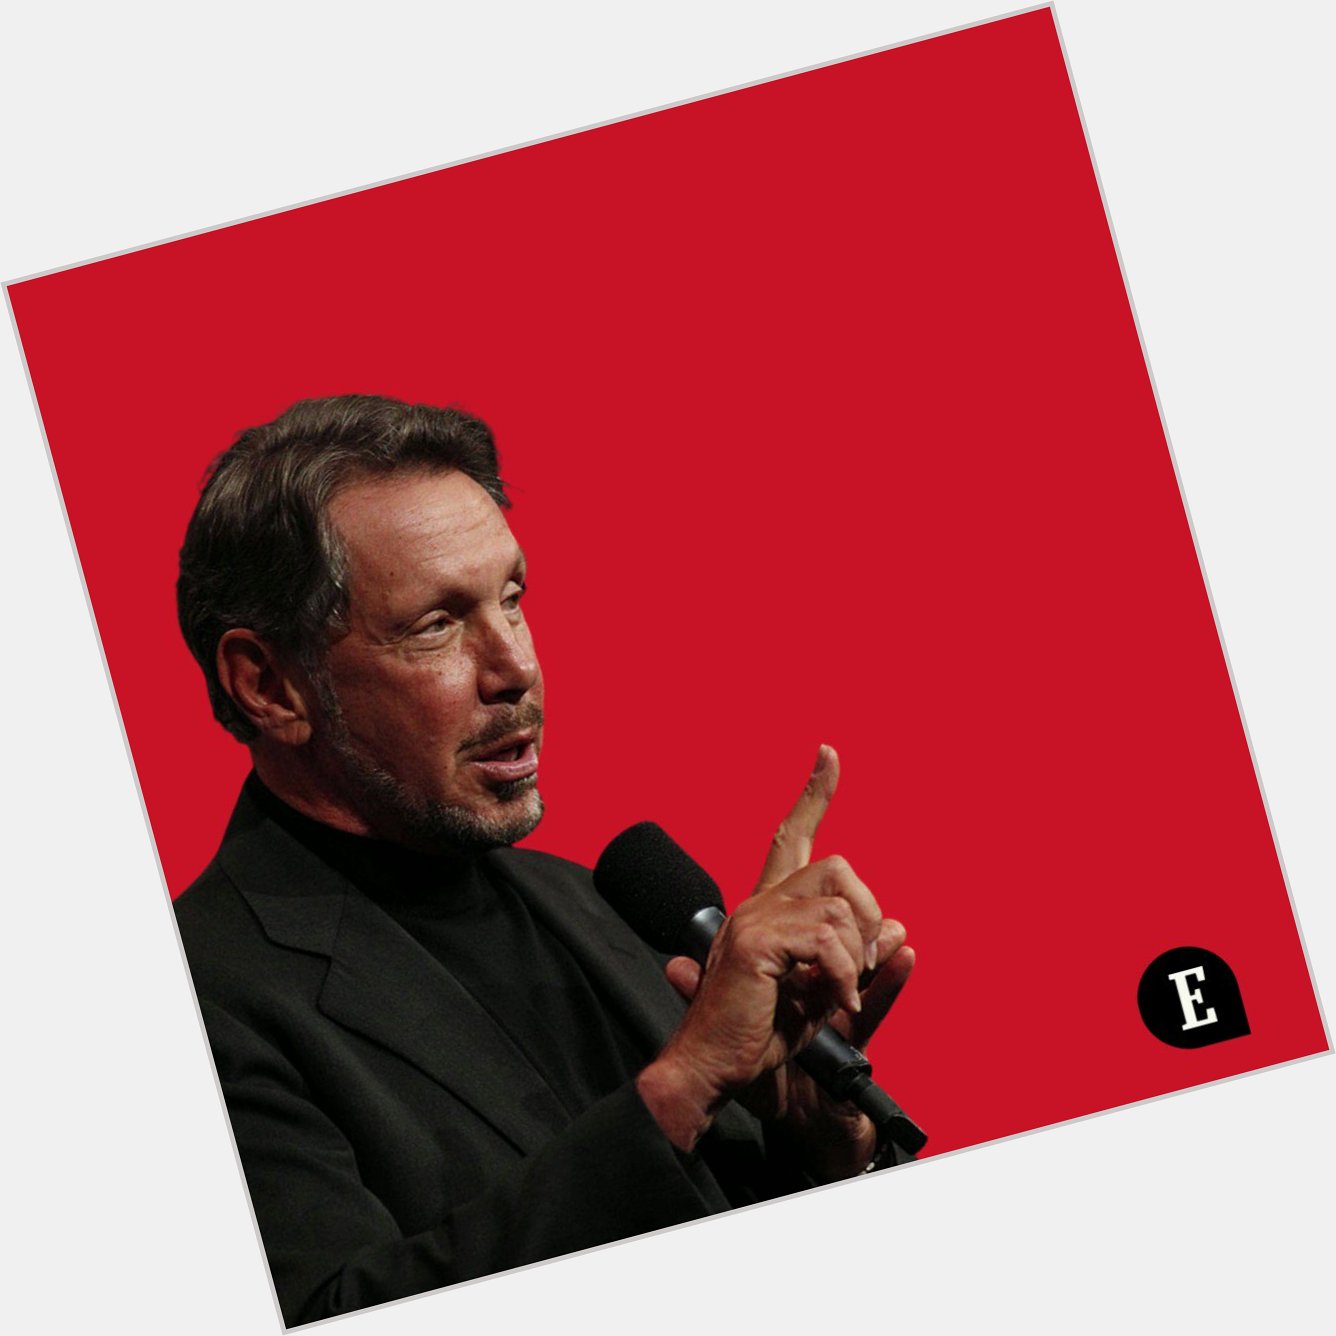 A very happy birthday to Oracle\s visionary co-founder, Larry Ellison. 